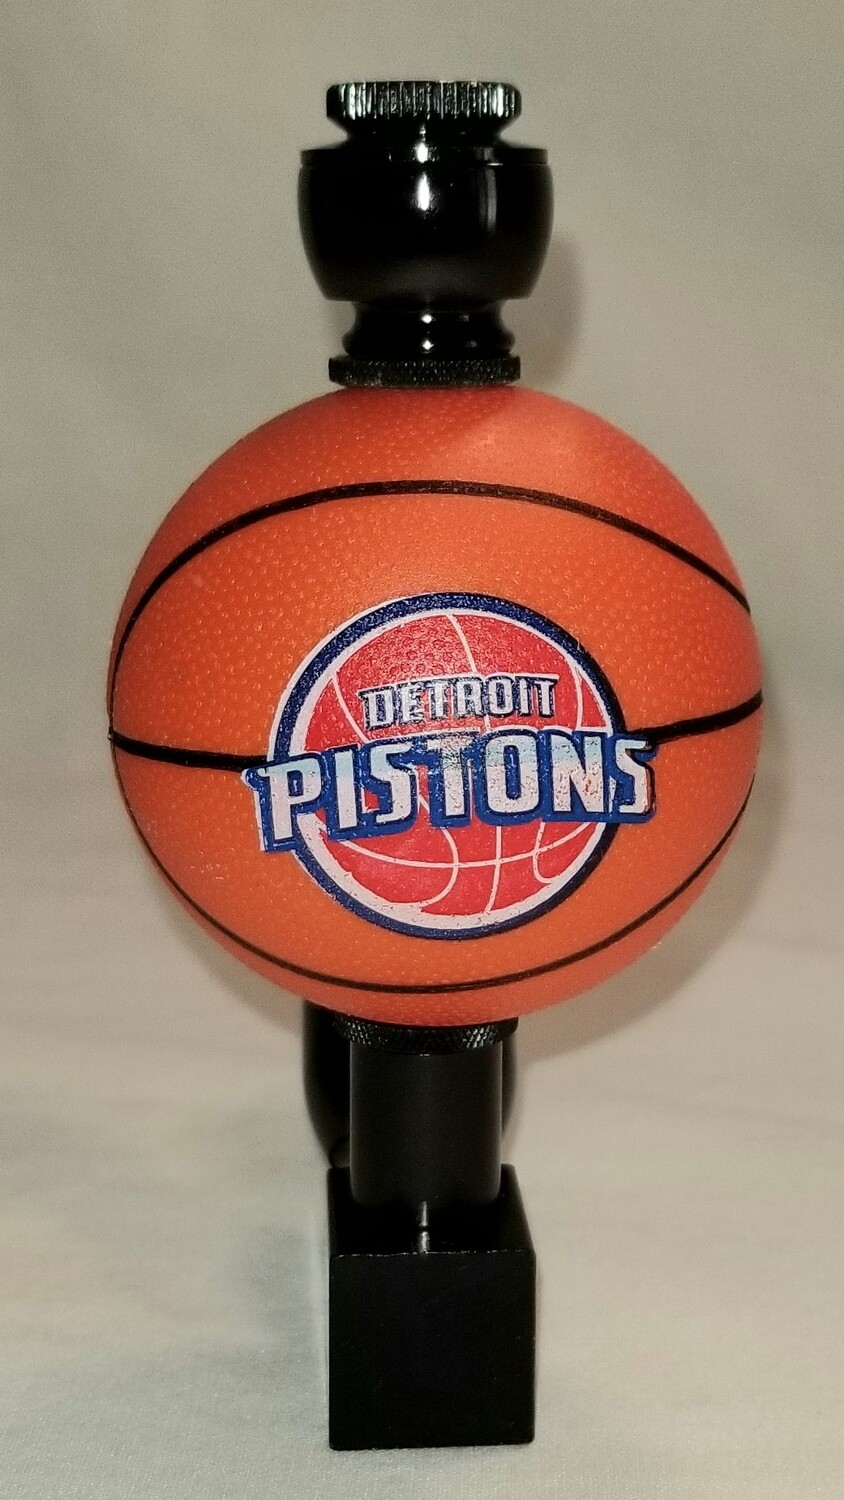 DETROIT PISTONS "BAD ASS" BASKETBALL SMOKING PIPE Wedge/Black Anodized